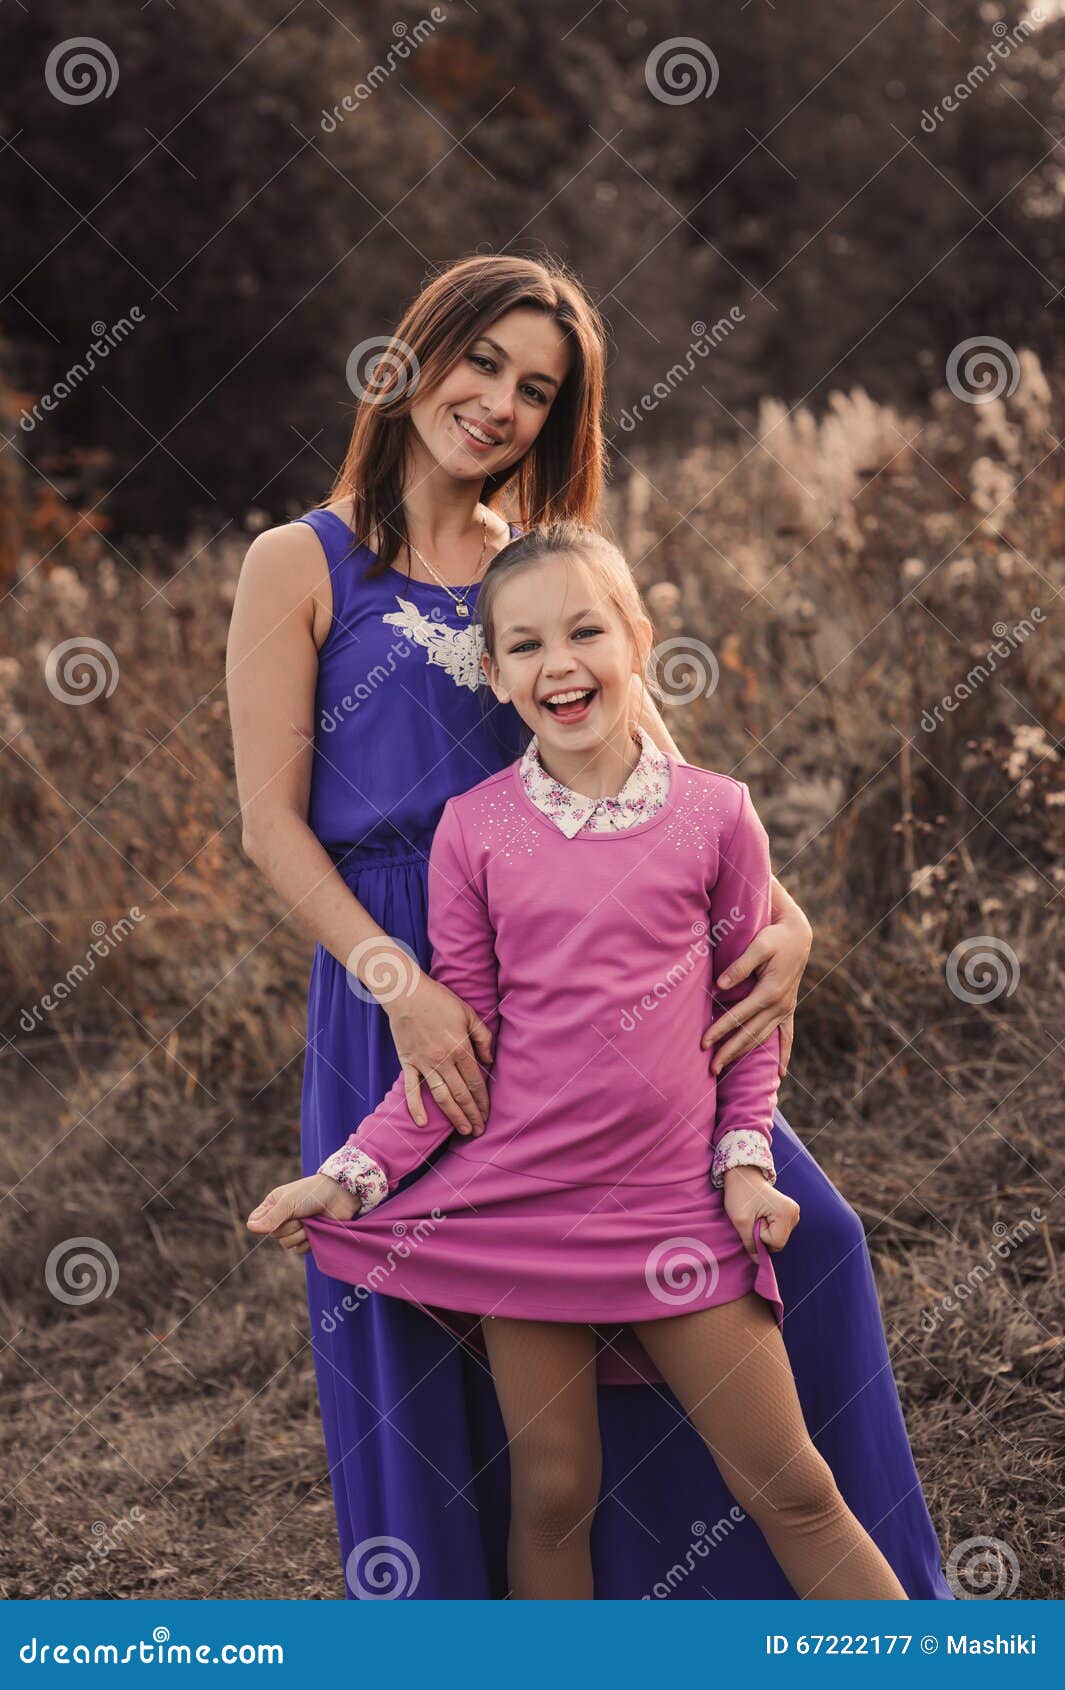 Lifestyle Capture Of Happy Mother And